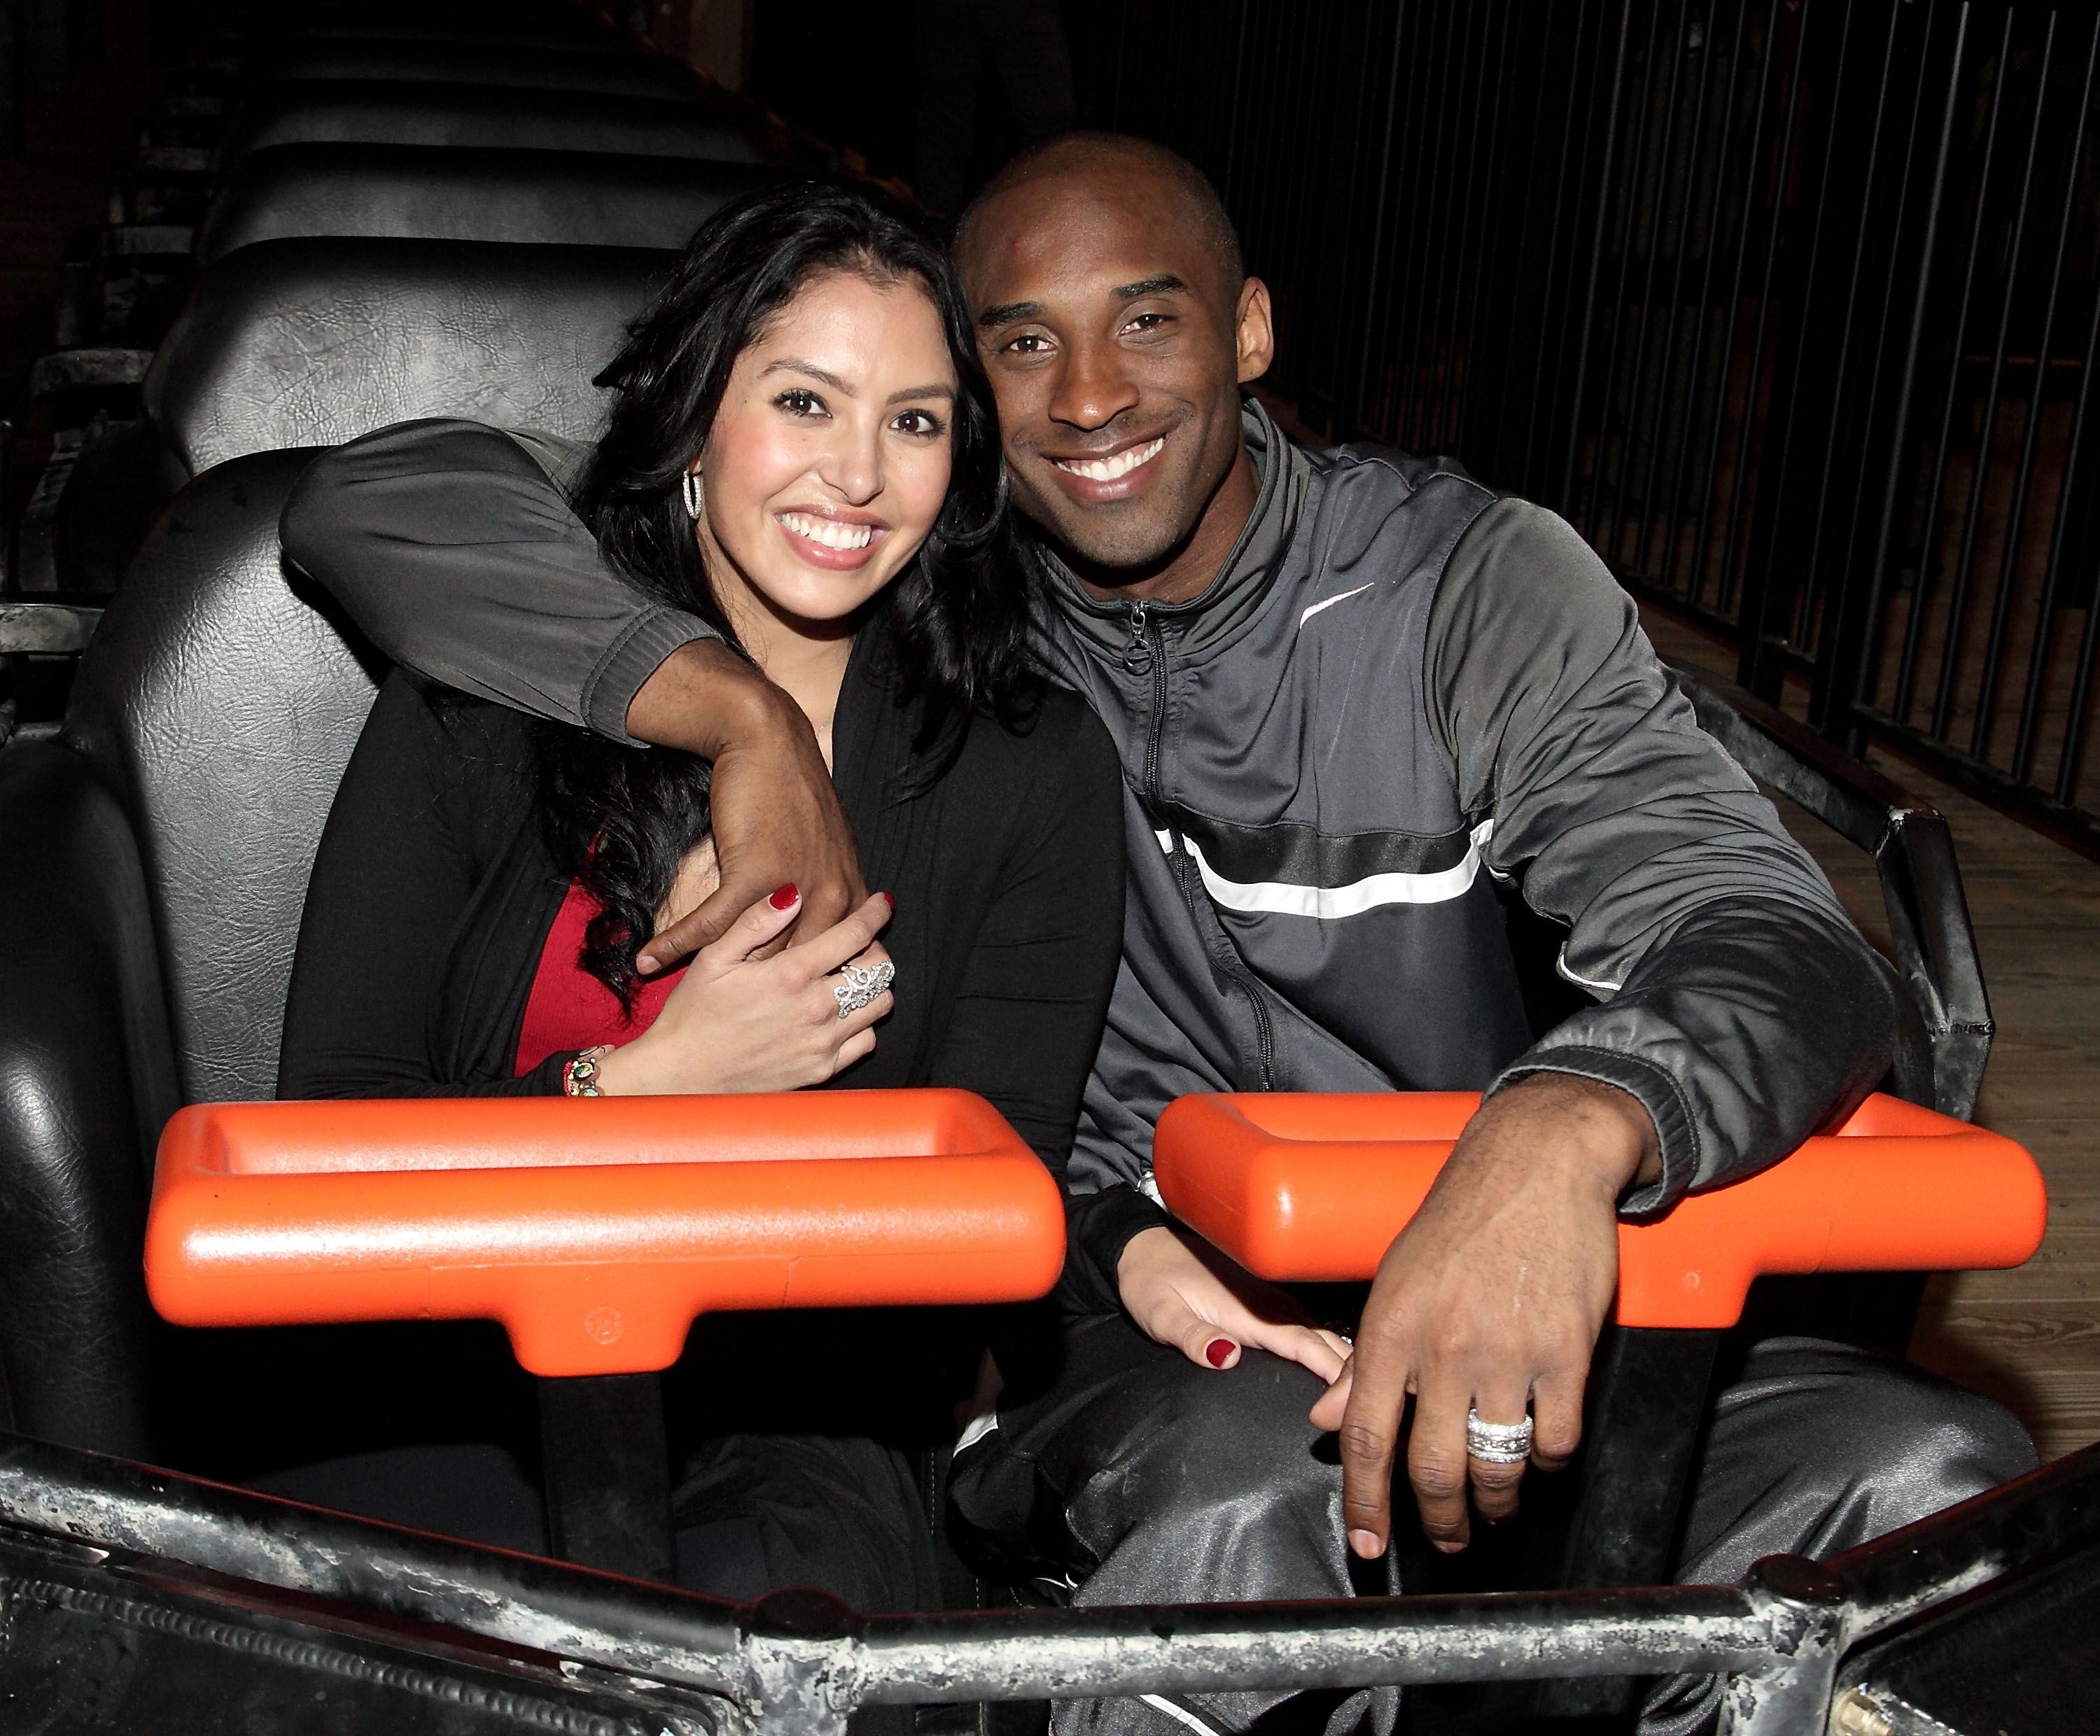 Kobe Bryant and Vanessa Bryant riding the Terminator Salvation - The Ride at Six Flags Magic Mountain on June 28, 2009 in Valencia, California. | Source: Getty Images